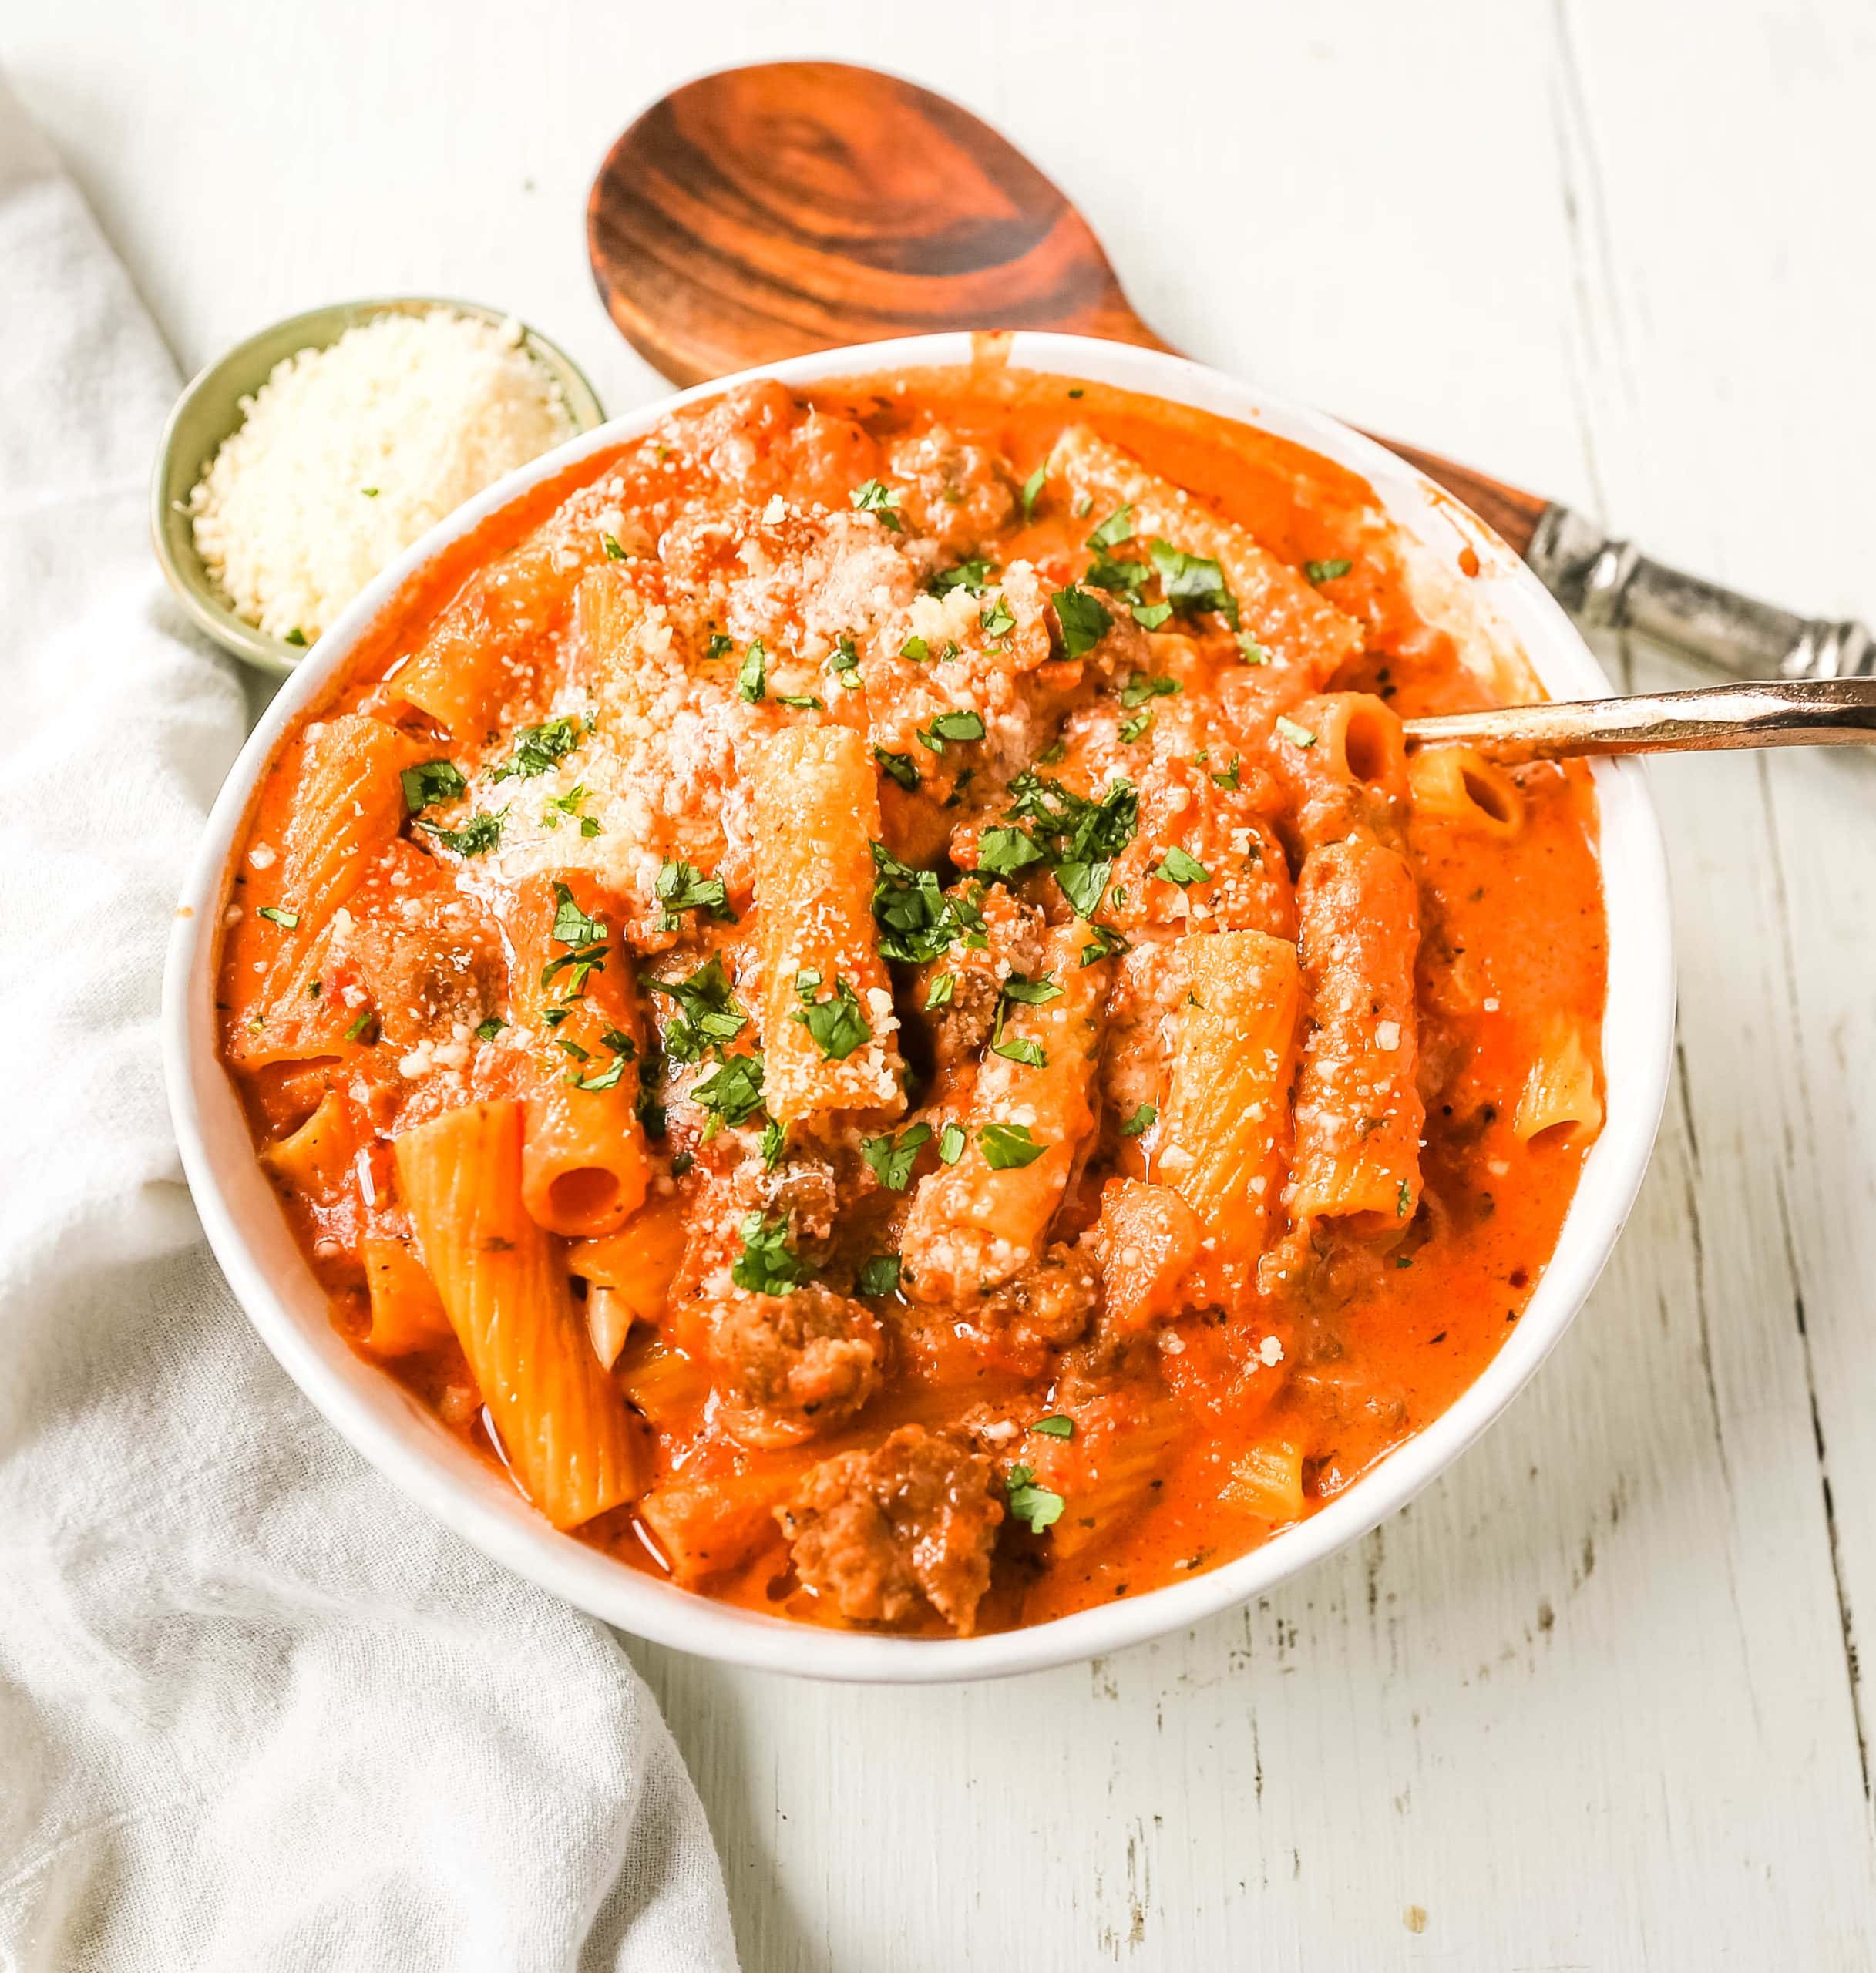 "Date Me" Creamy Sausage Rigatoni Pasta Homemade rich and creamy tomato cream and sausage sauce tossed with rigatoni and topped with parmesan cheese. The best creamy sausage rigatoni pasta! #pasta #dinner